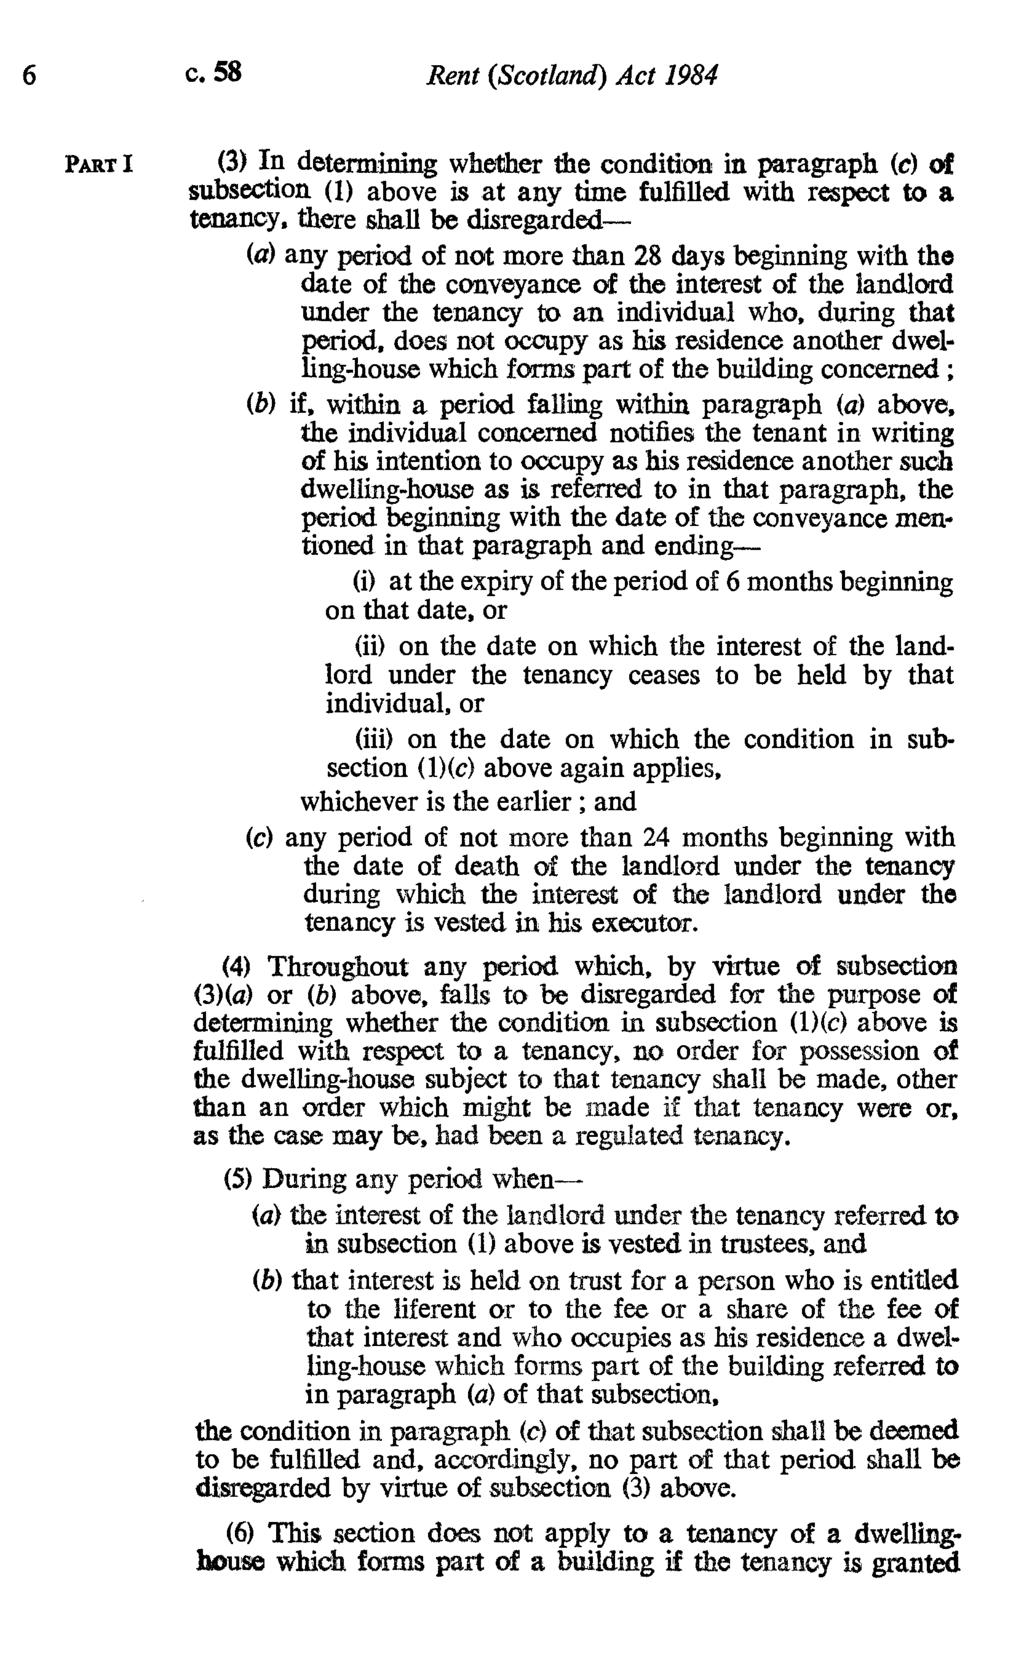 6 C. 58 Rent (Scotland) Act 1984 PART I (3) In determining whether the condition in paragraph (c) of subsection (1) above is at any time fulfilled with respect to a tenancy, there shall be